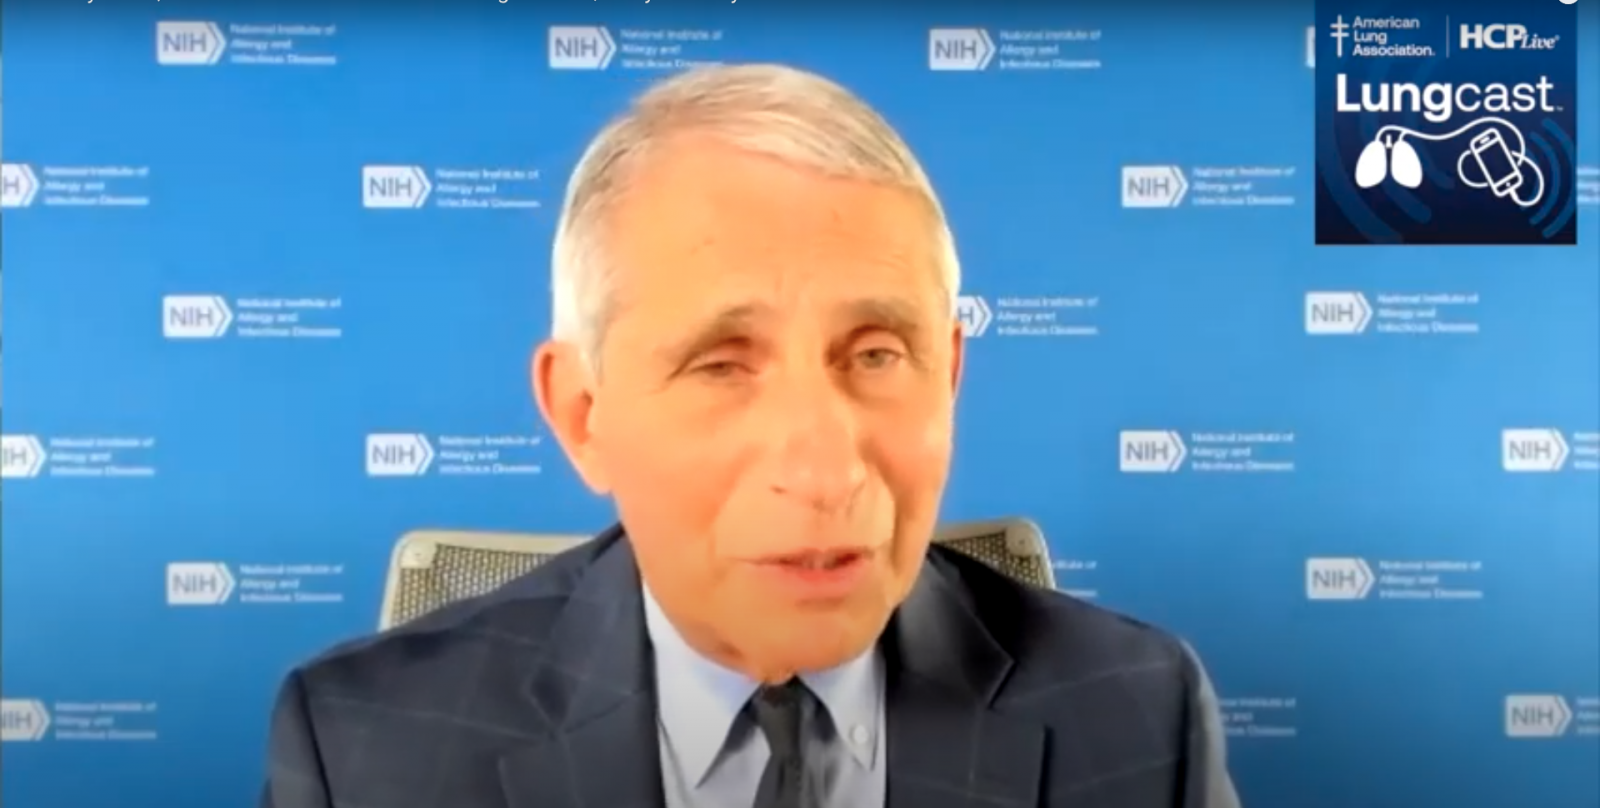 Anthony Fauci, MD: COVID-19 Vaccine Understanding is Developing